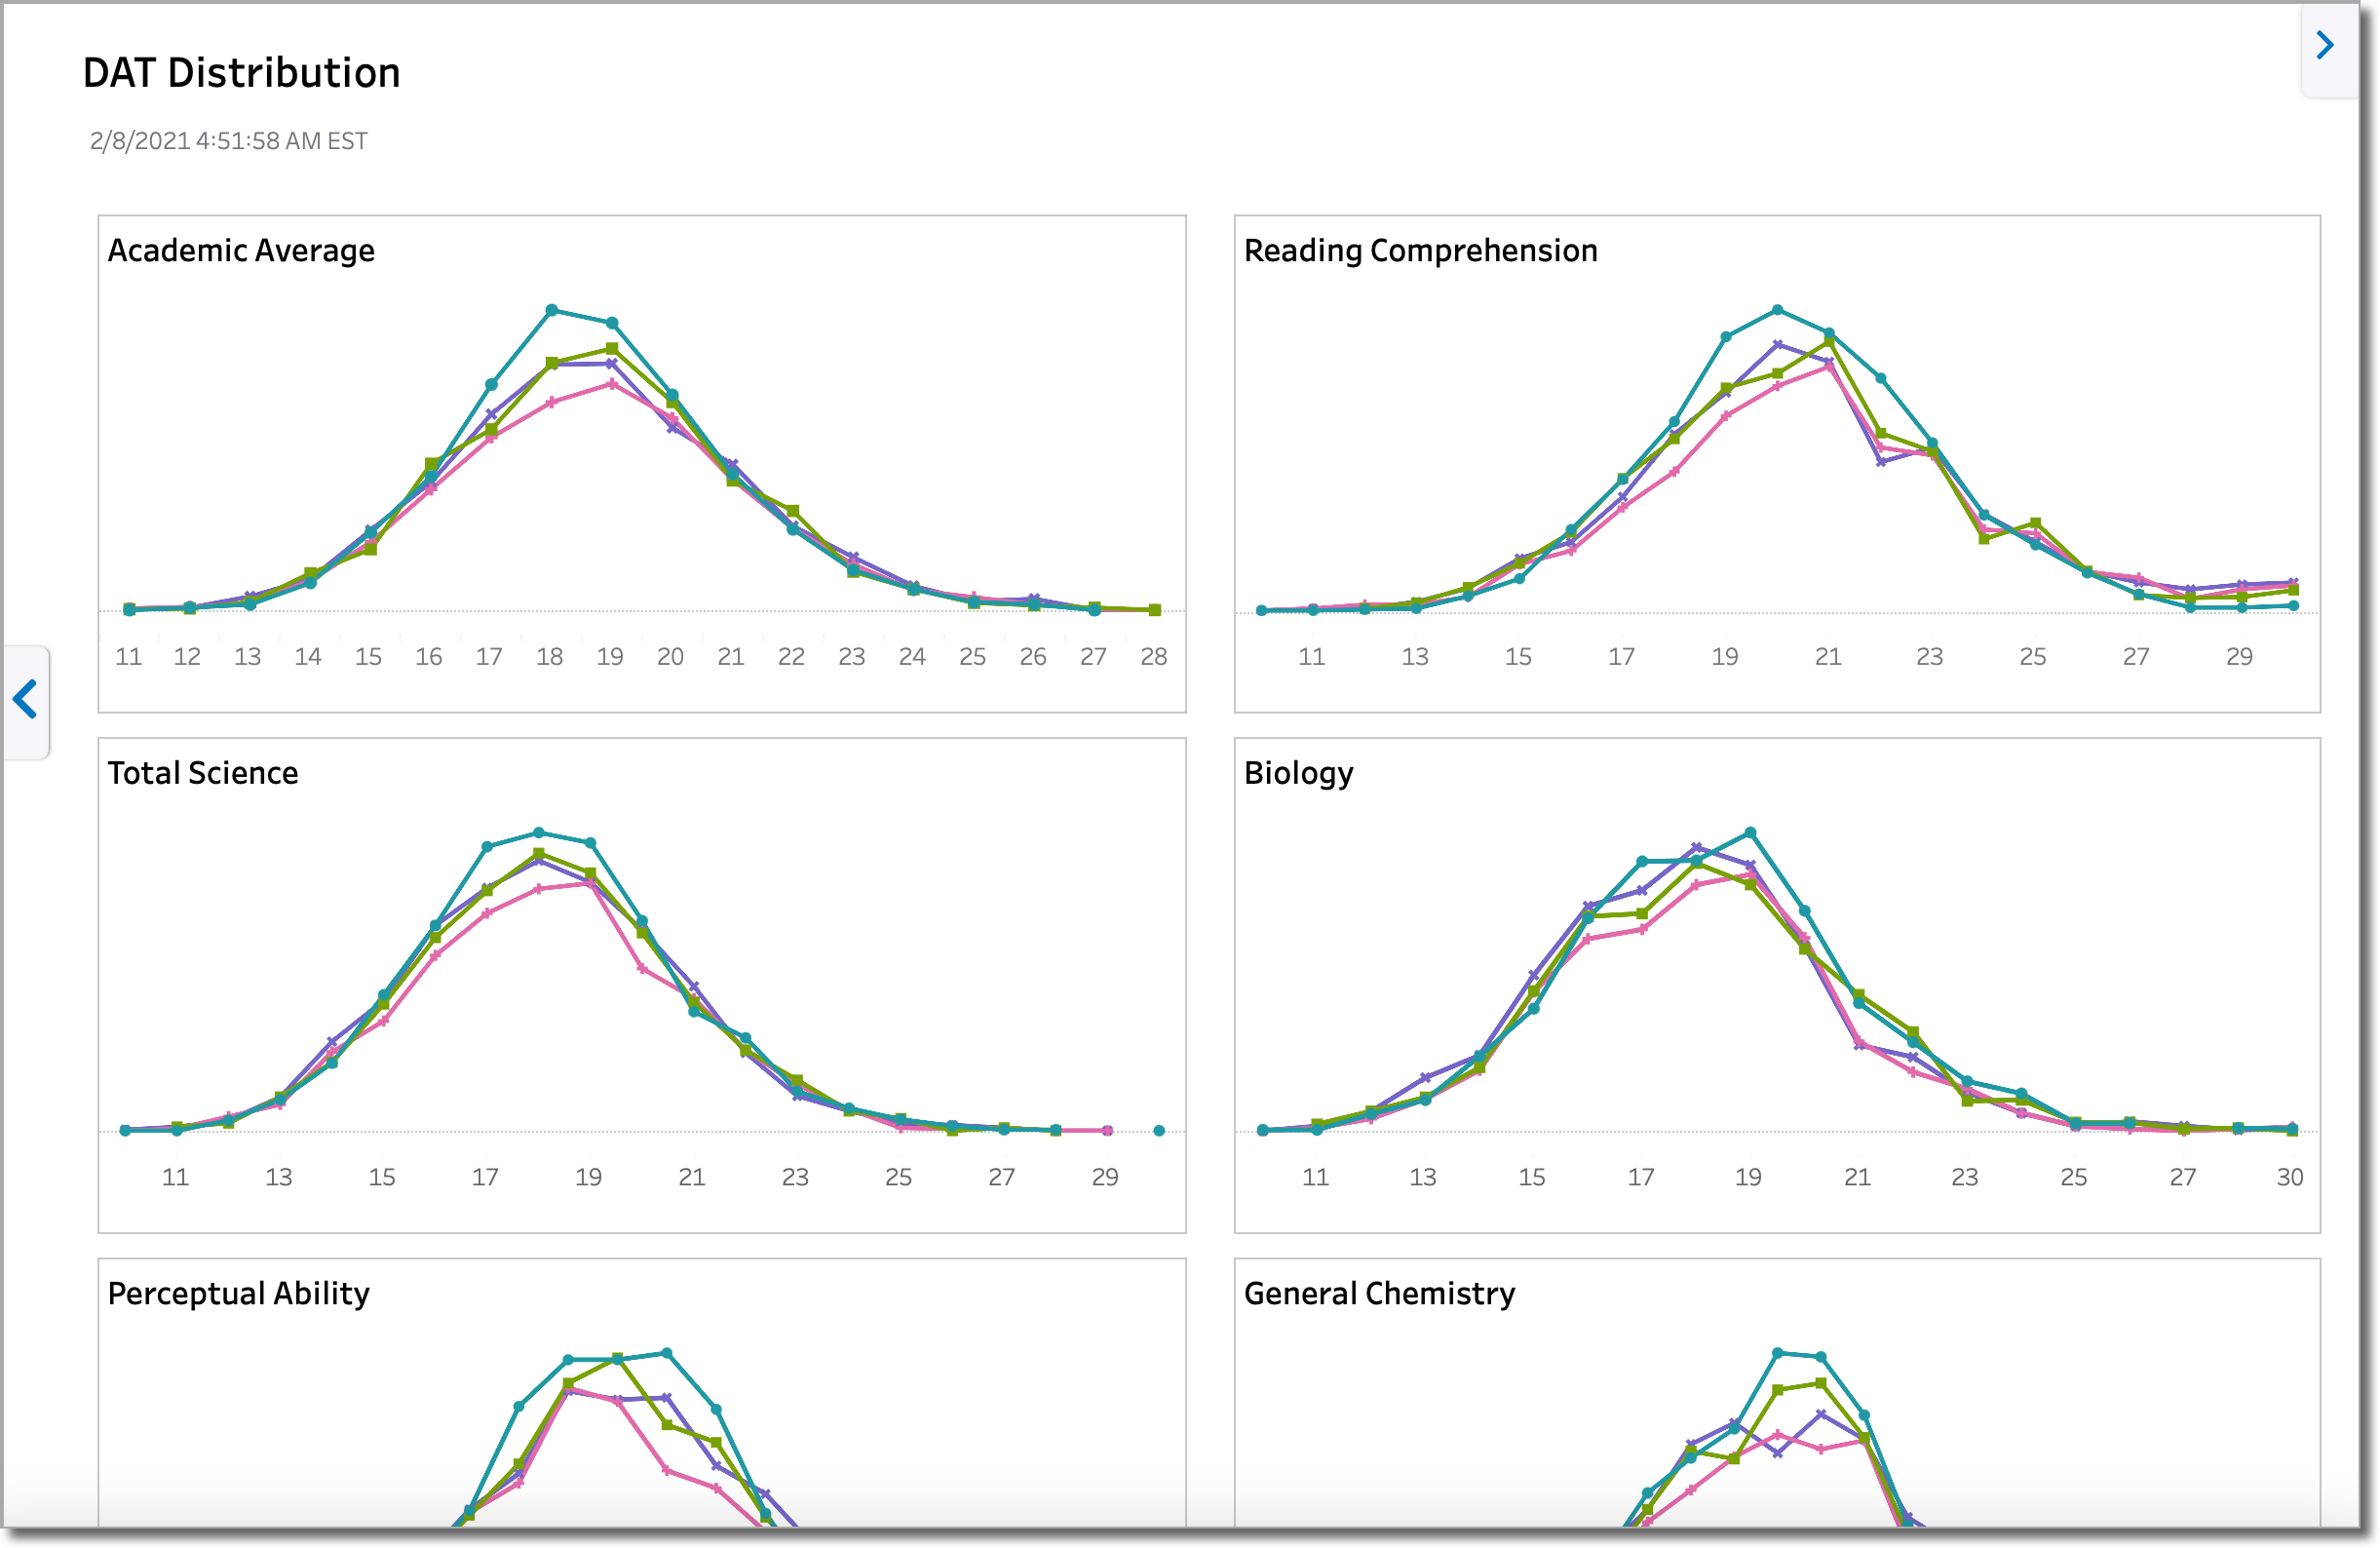 Example of a DAT Distribution dashboard with various line graphs